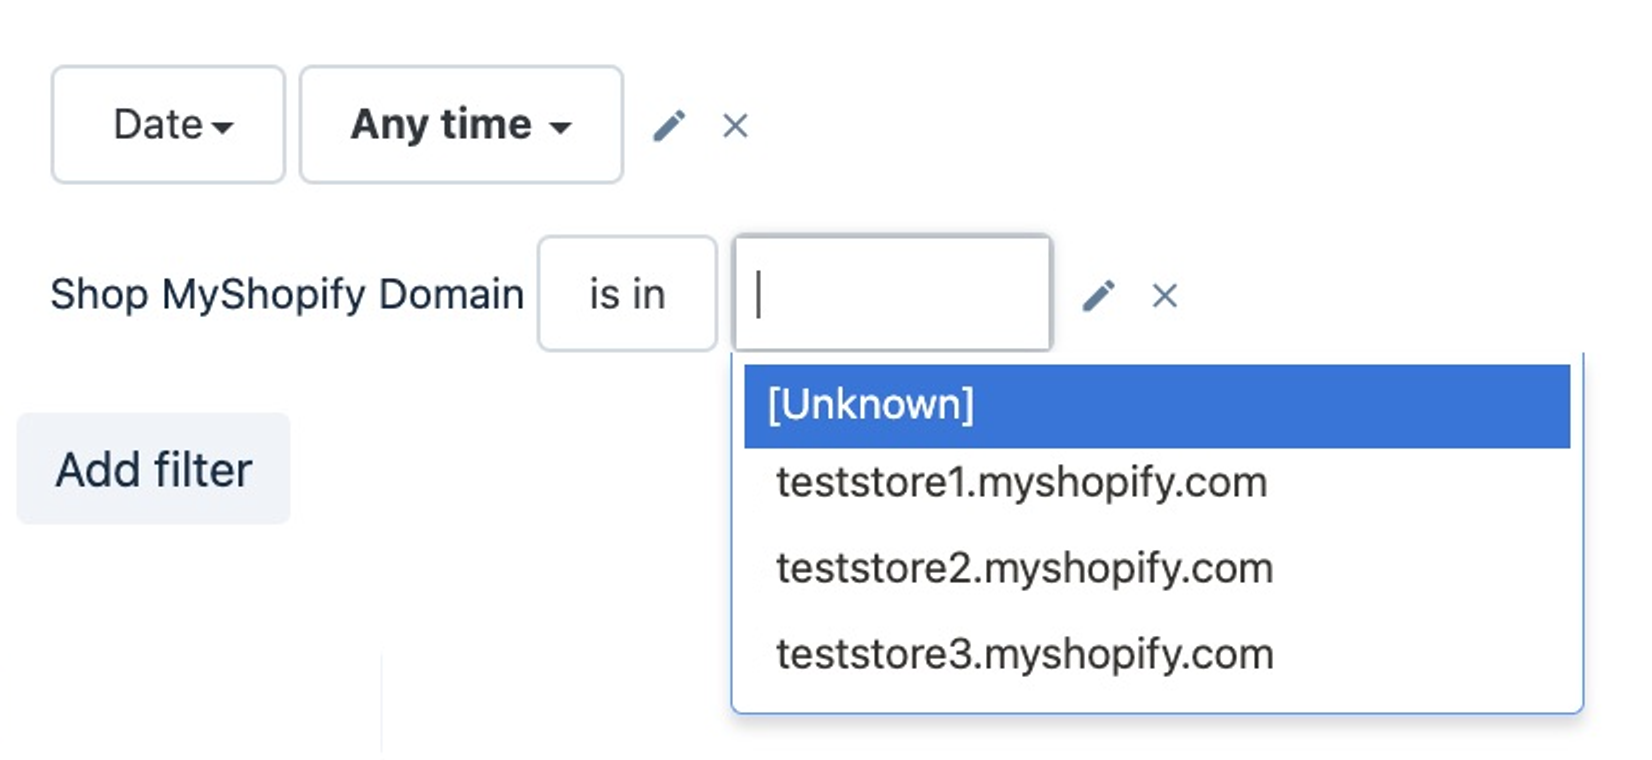 Filter for ‘My Shopify Domain is not in [Unknown]’ to include all store data